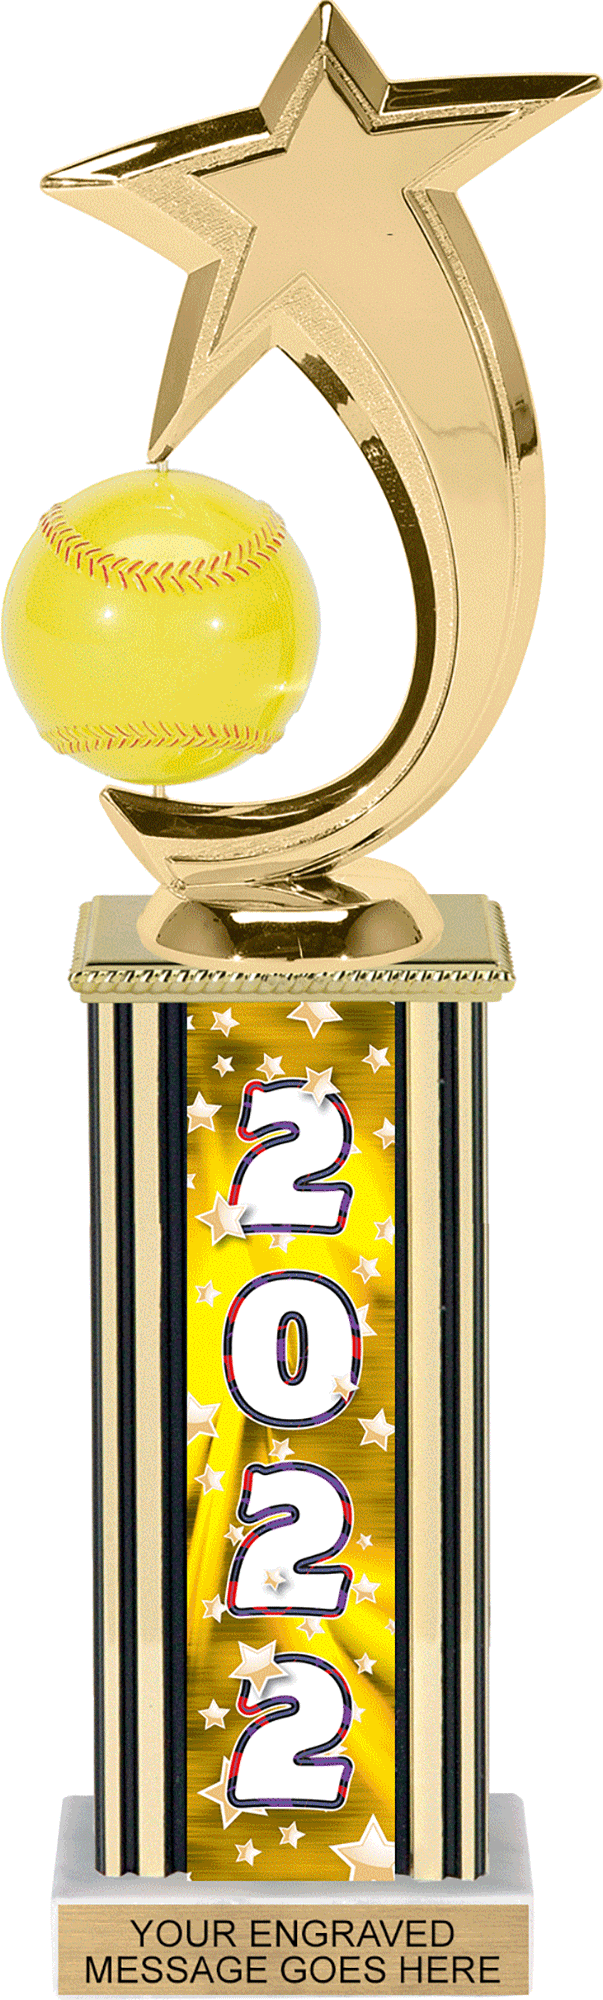 Year Glowing Stars Rectangle Column Trophy - Gold 12 inch